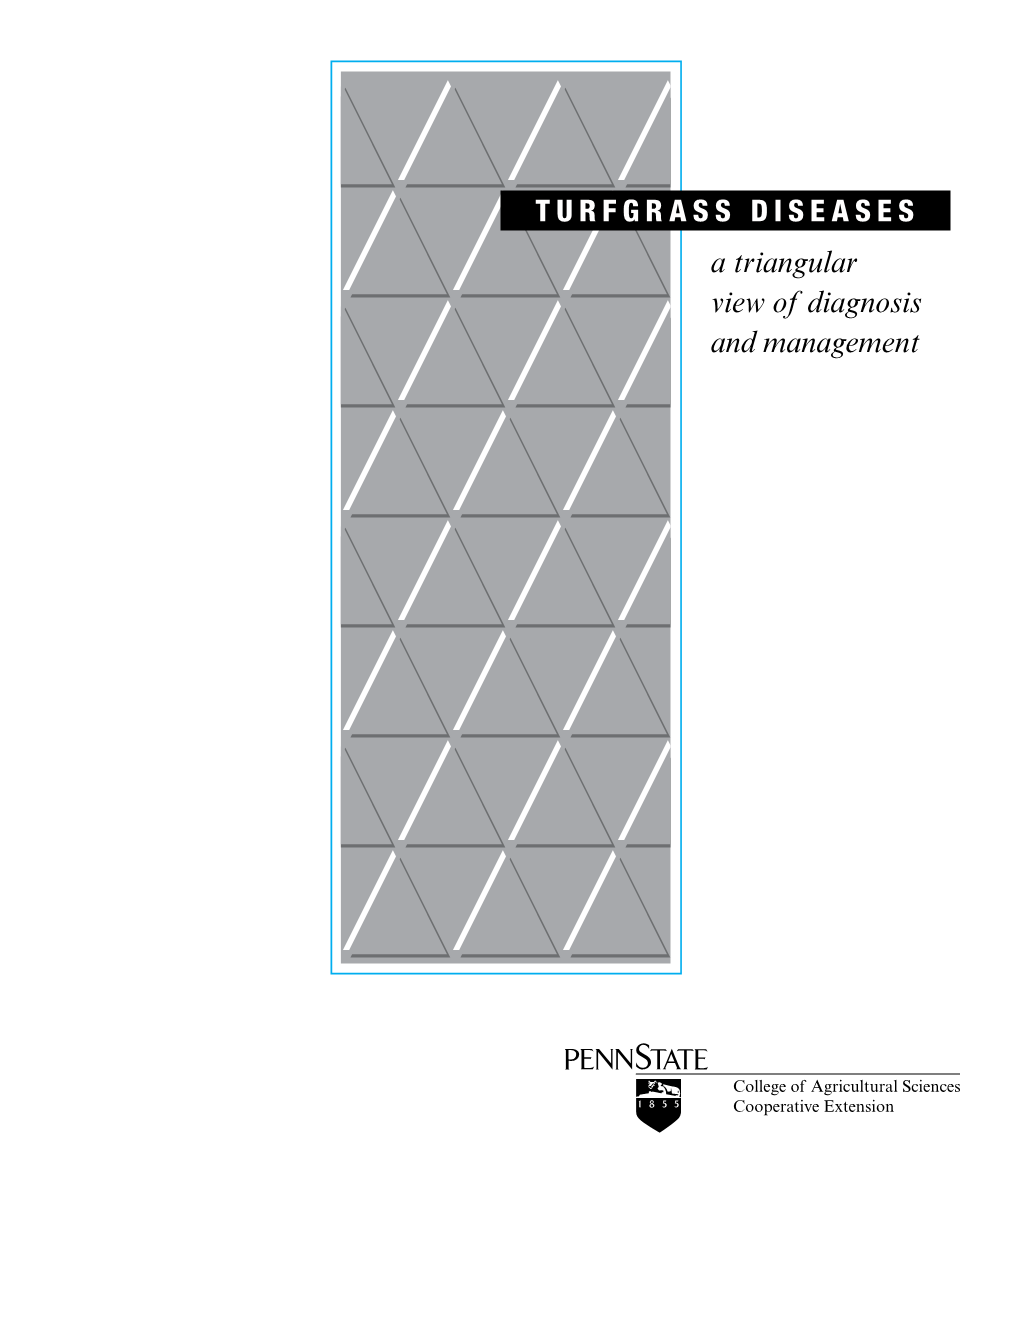 TURFGRASS DISEASES a Triangular View of Diagnosis and Management